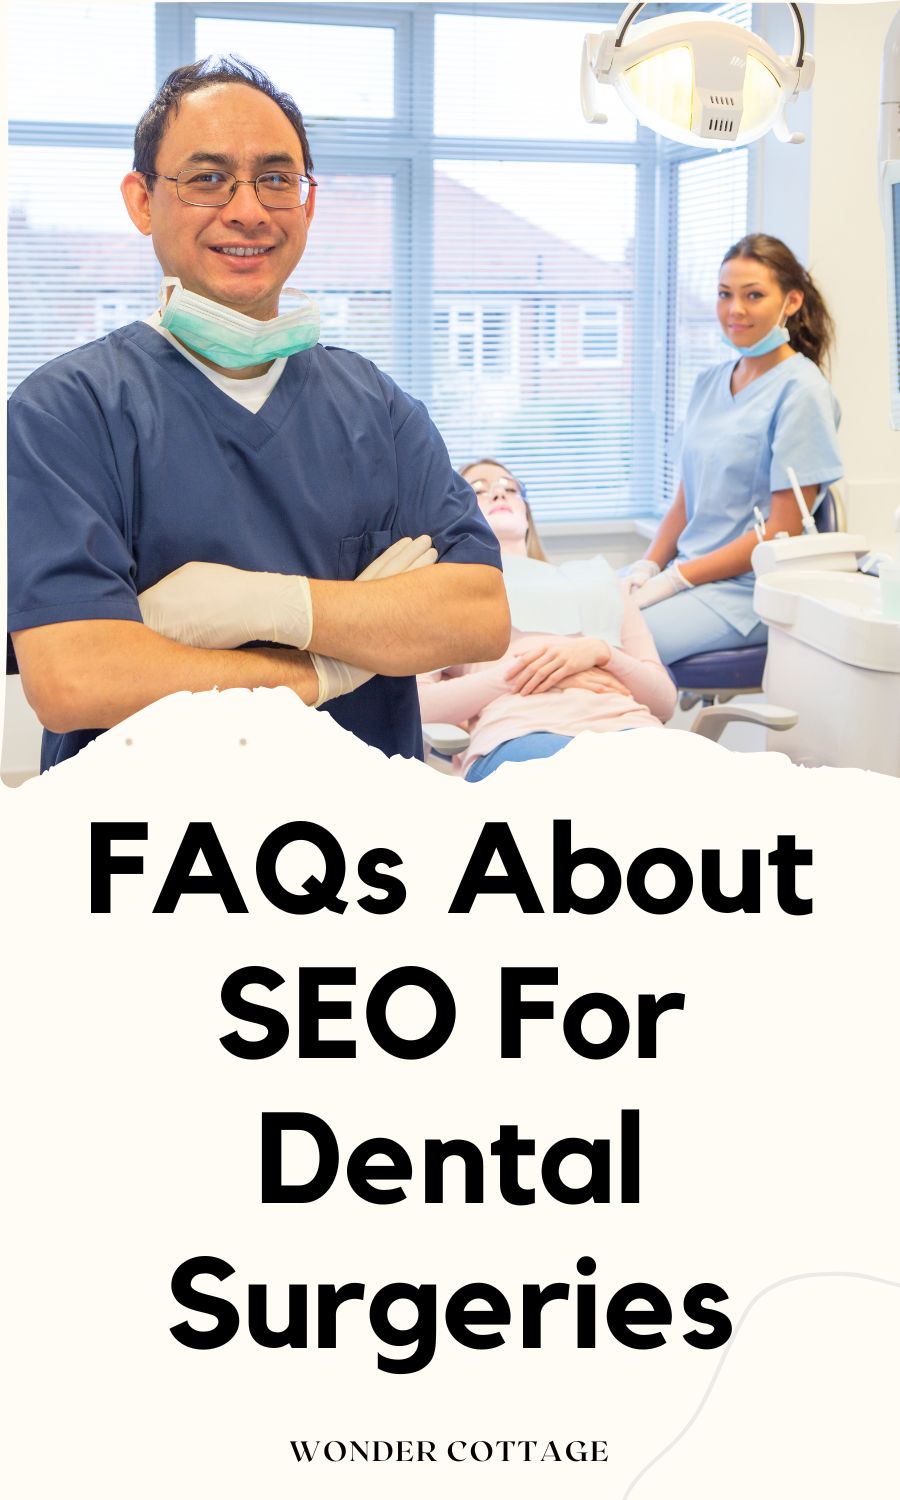 FAQs About SEO For Dental Surgeries